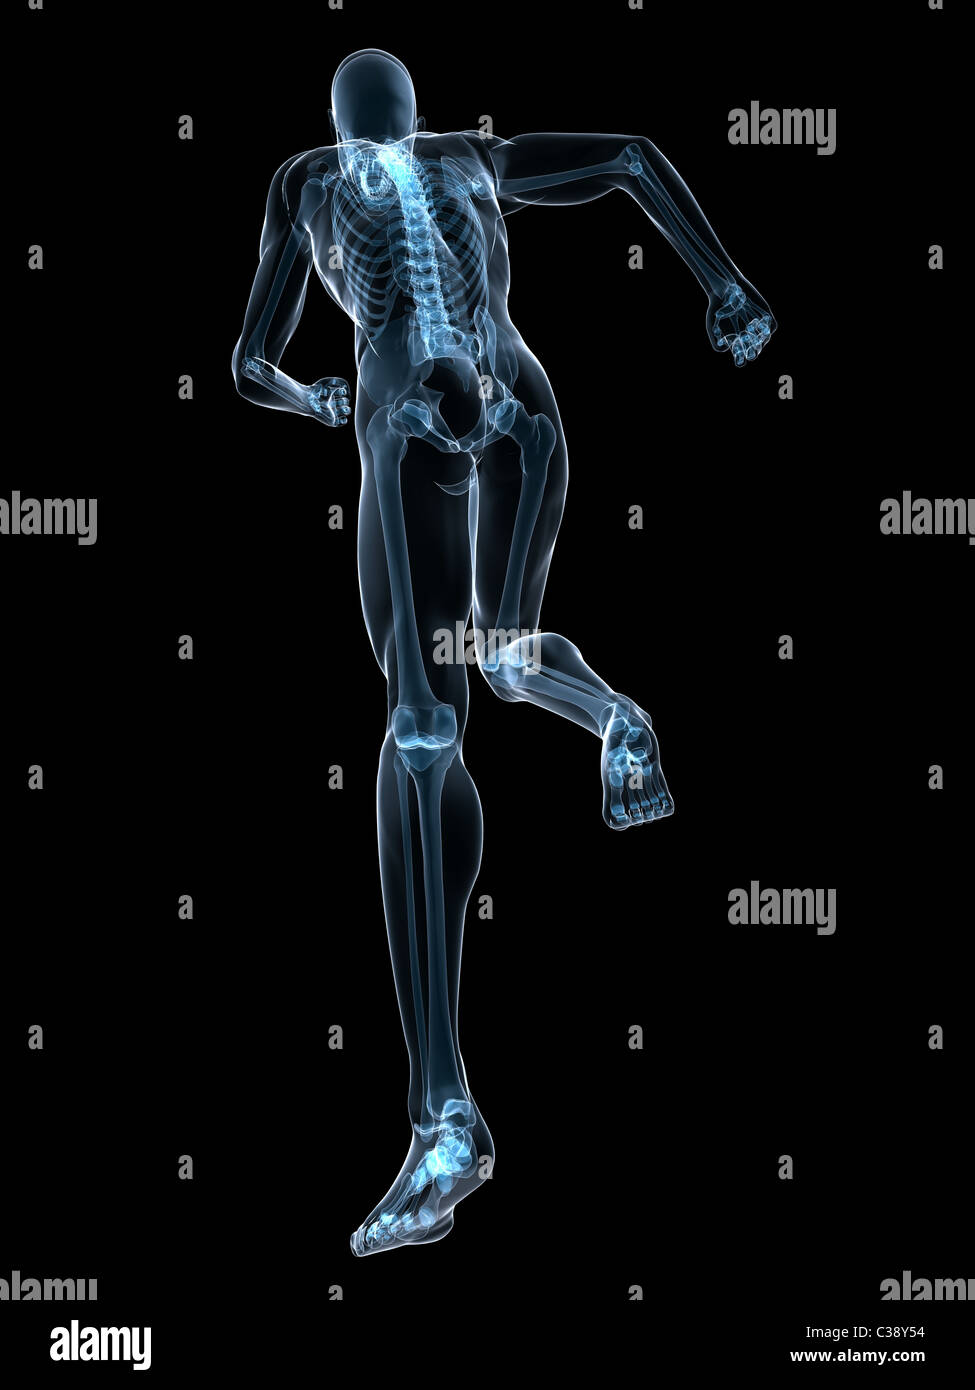 Medical Skeleton Running Knee Joints High Resolution Stock Photography ...